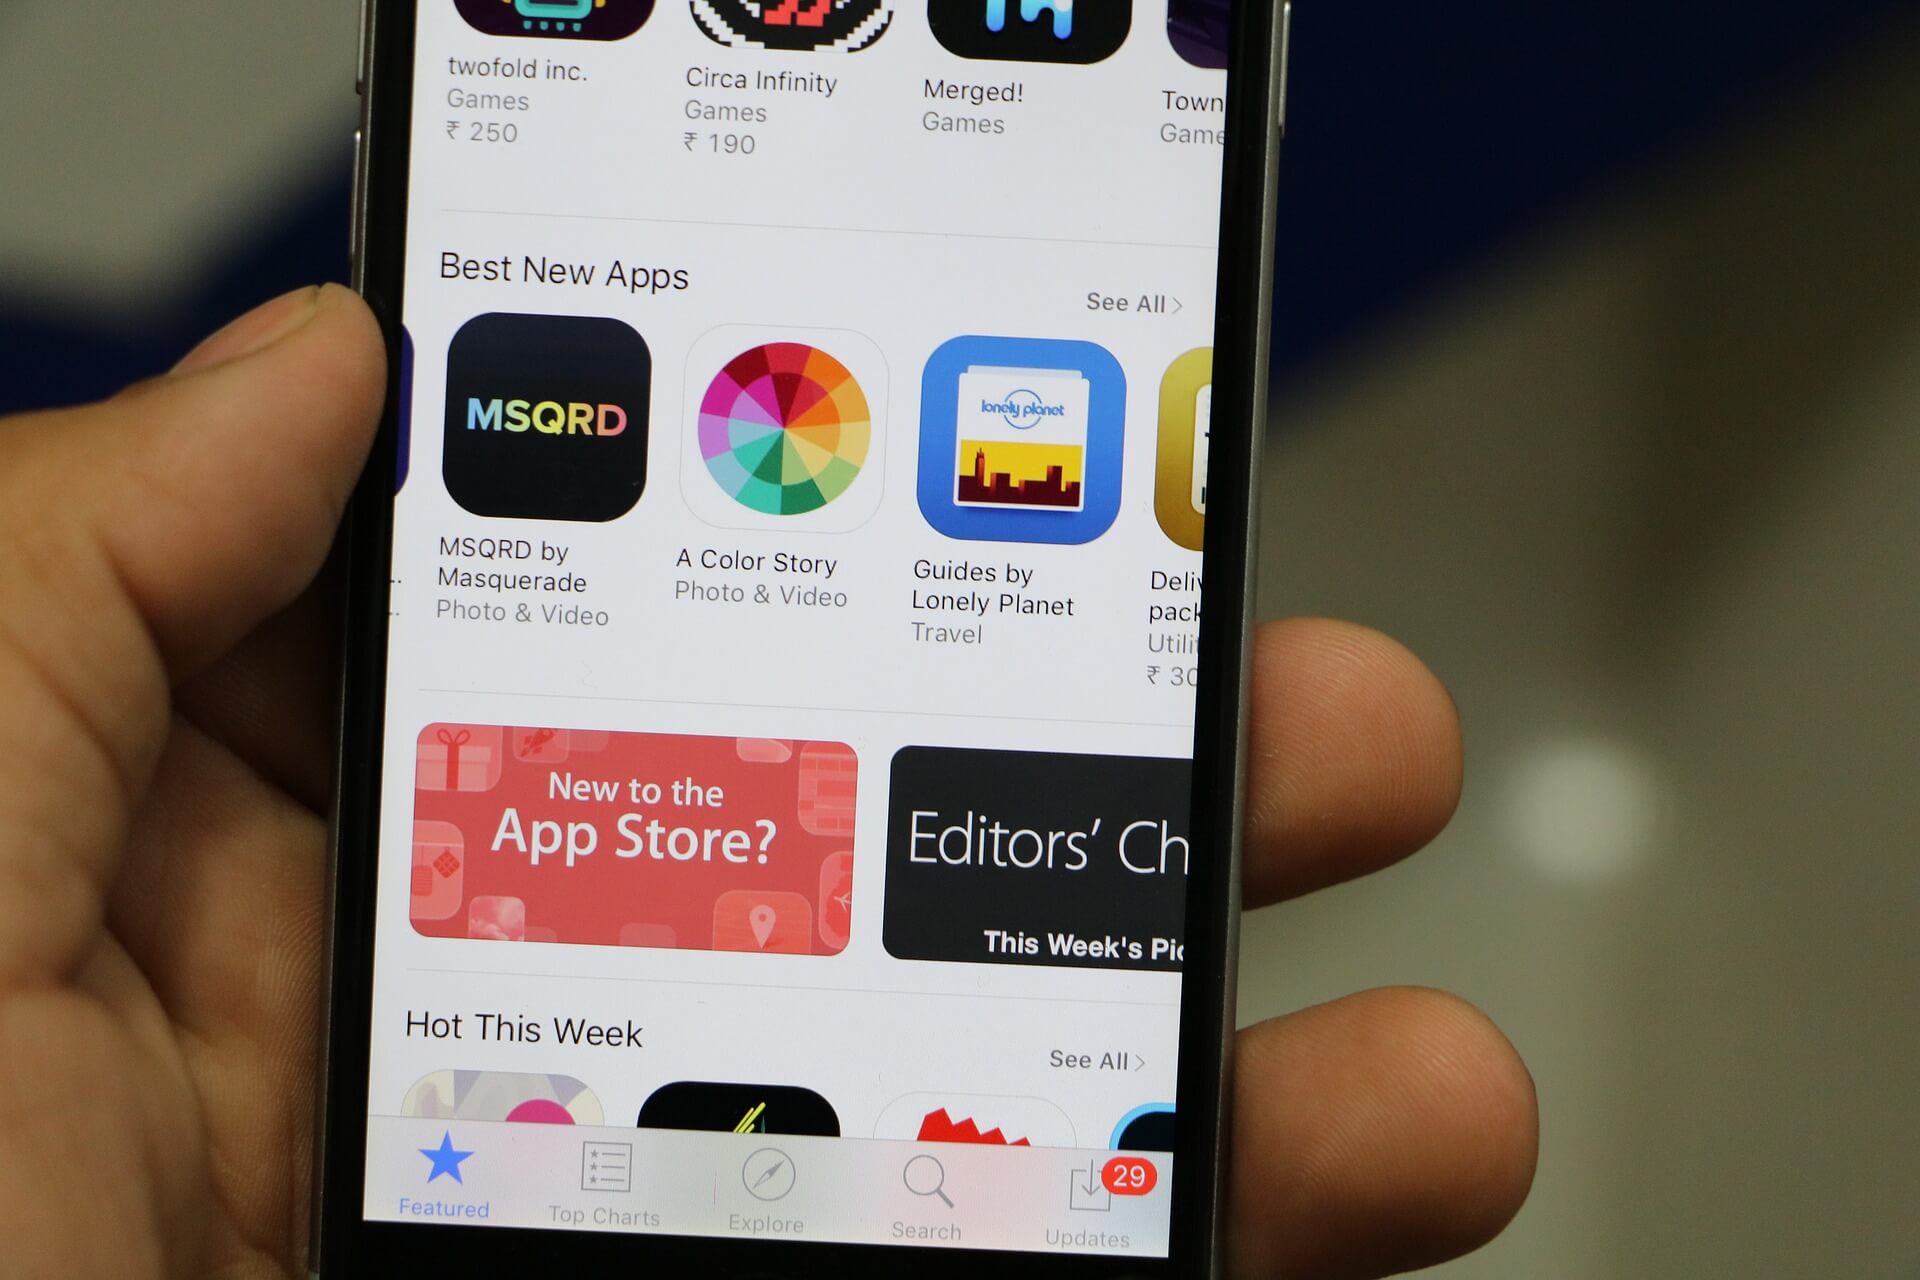 How to Prep for Being Featured in the App Store